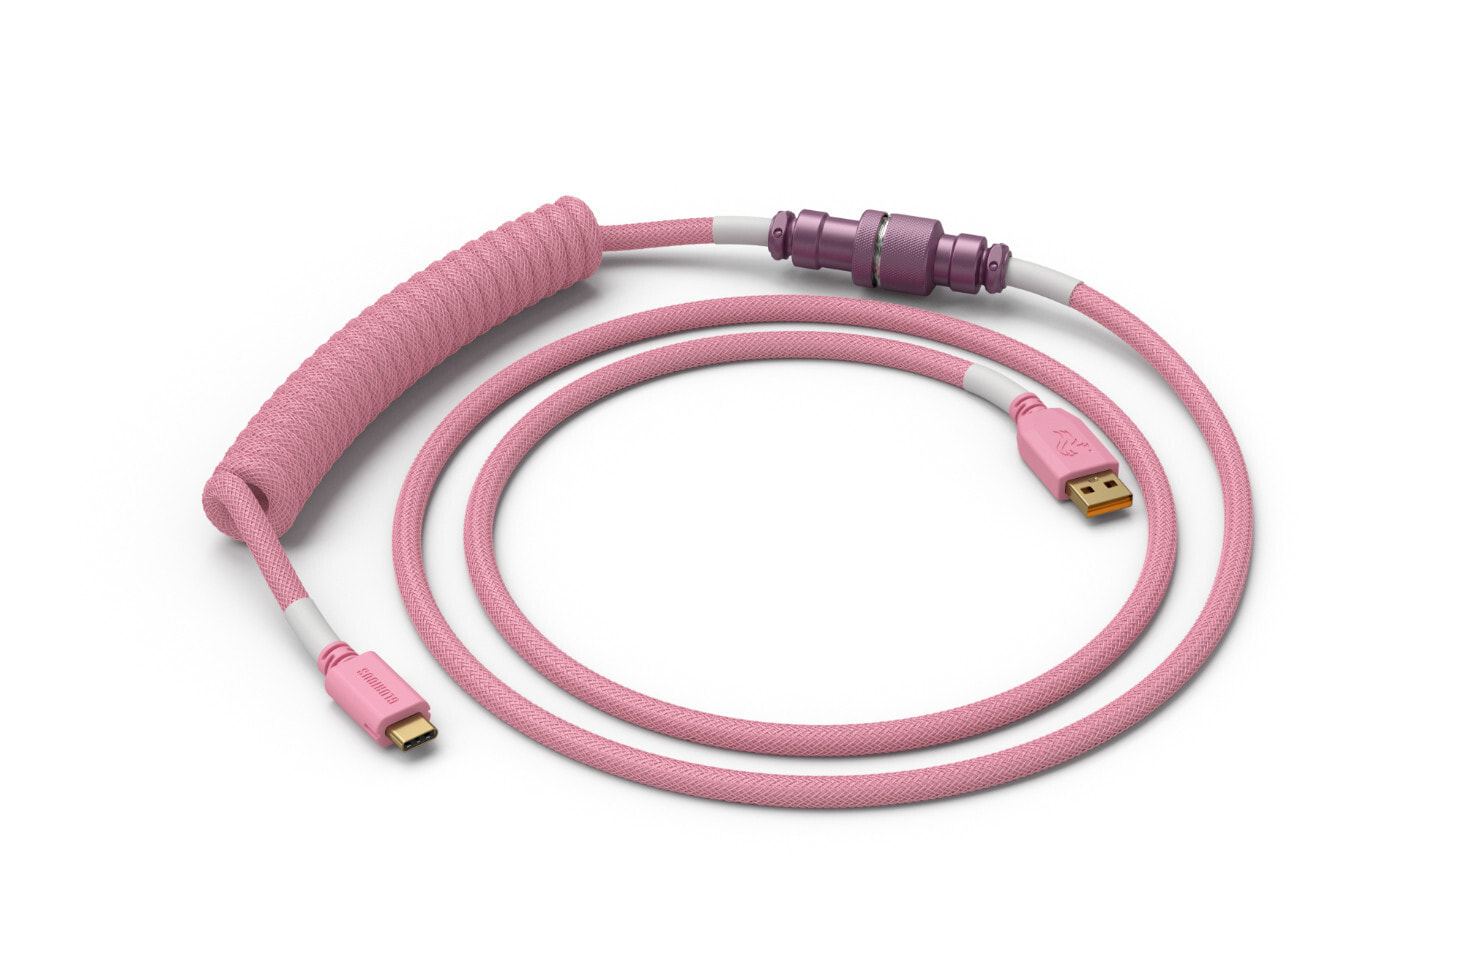 Glorious PC Gaming Race Coiled - Pink - 1.37 m - Glorious PC Gaming Race - 1 pc(s) - Braided - USB Type-A - USB Type-C